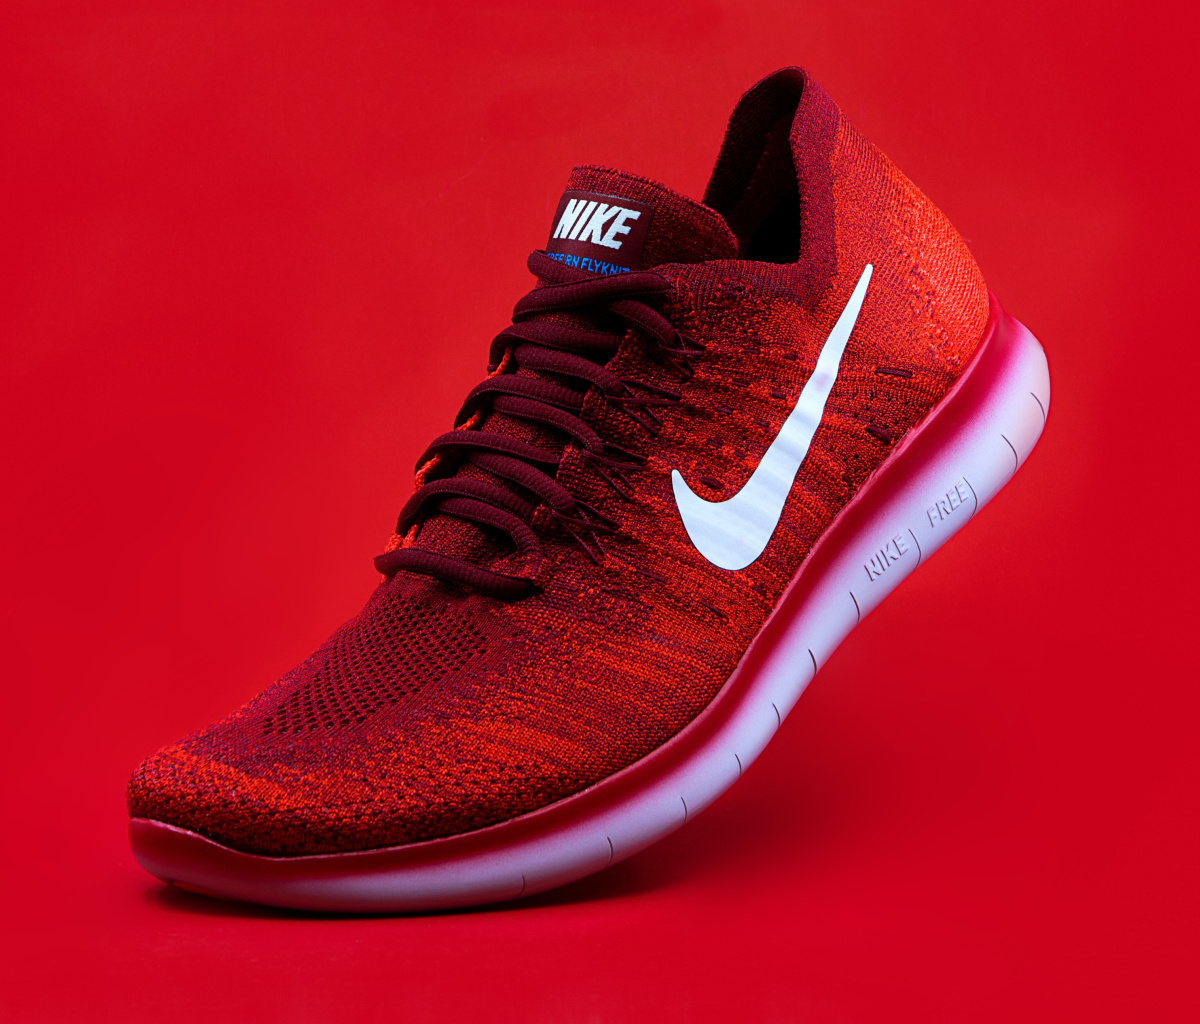 Red Nike Shoes wallpaper 1200x1024